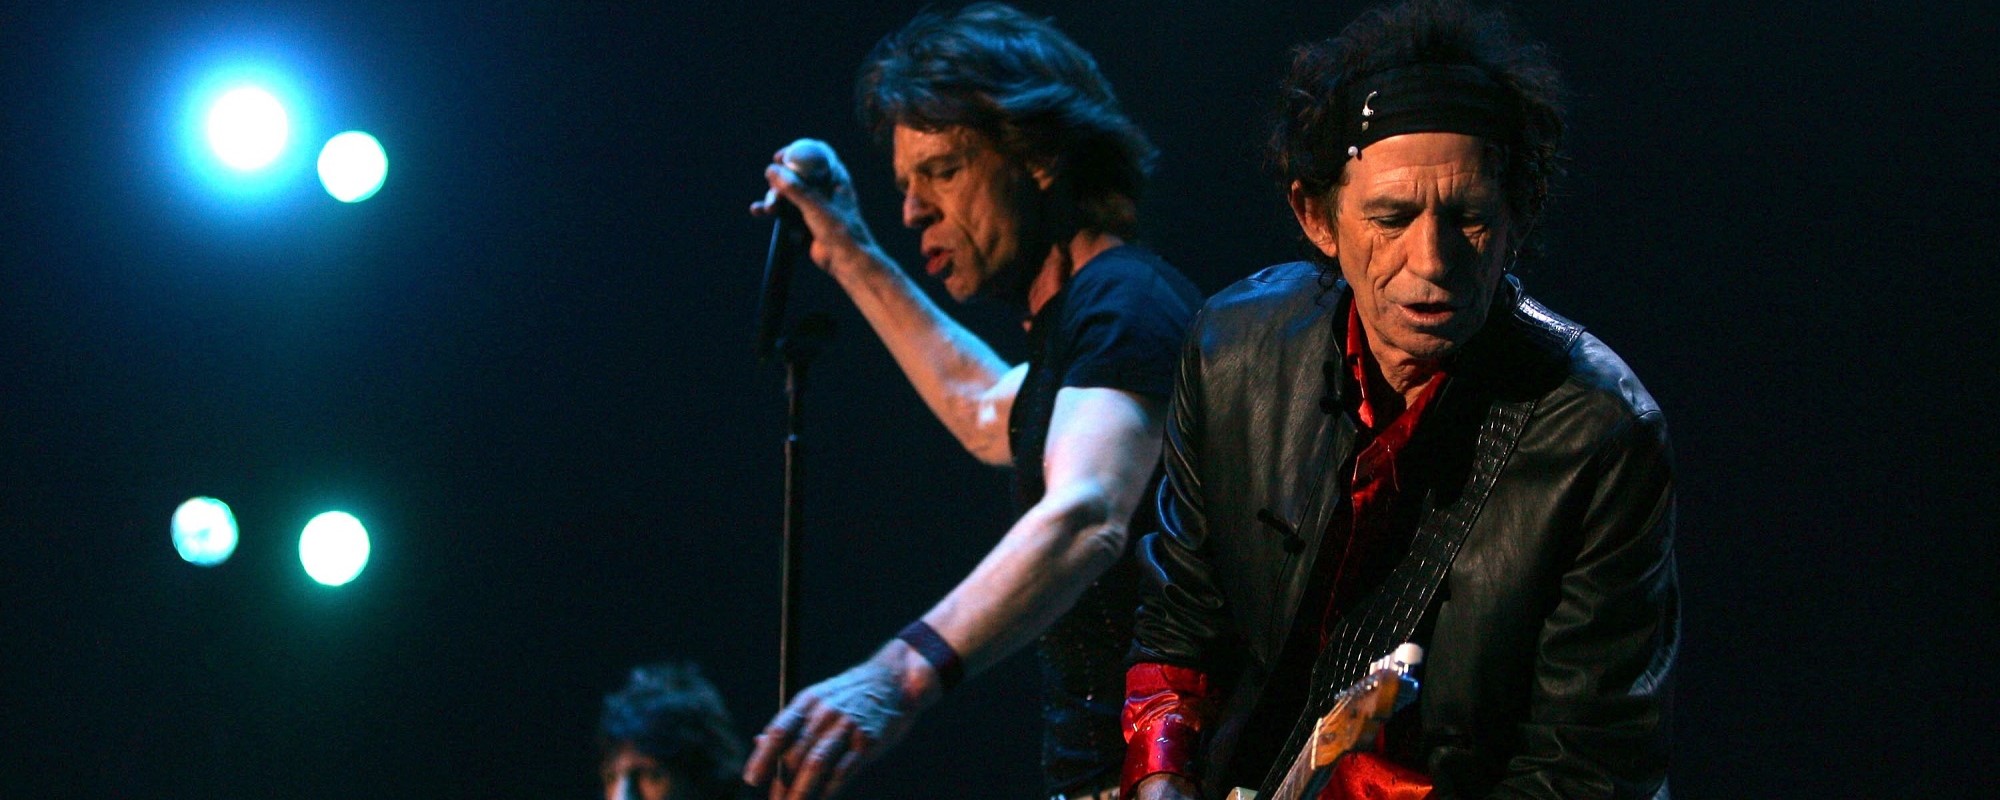 Documentary About Historic Rolling Stones Concert in China Is Coming Soon